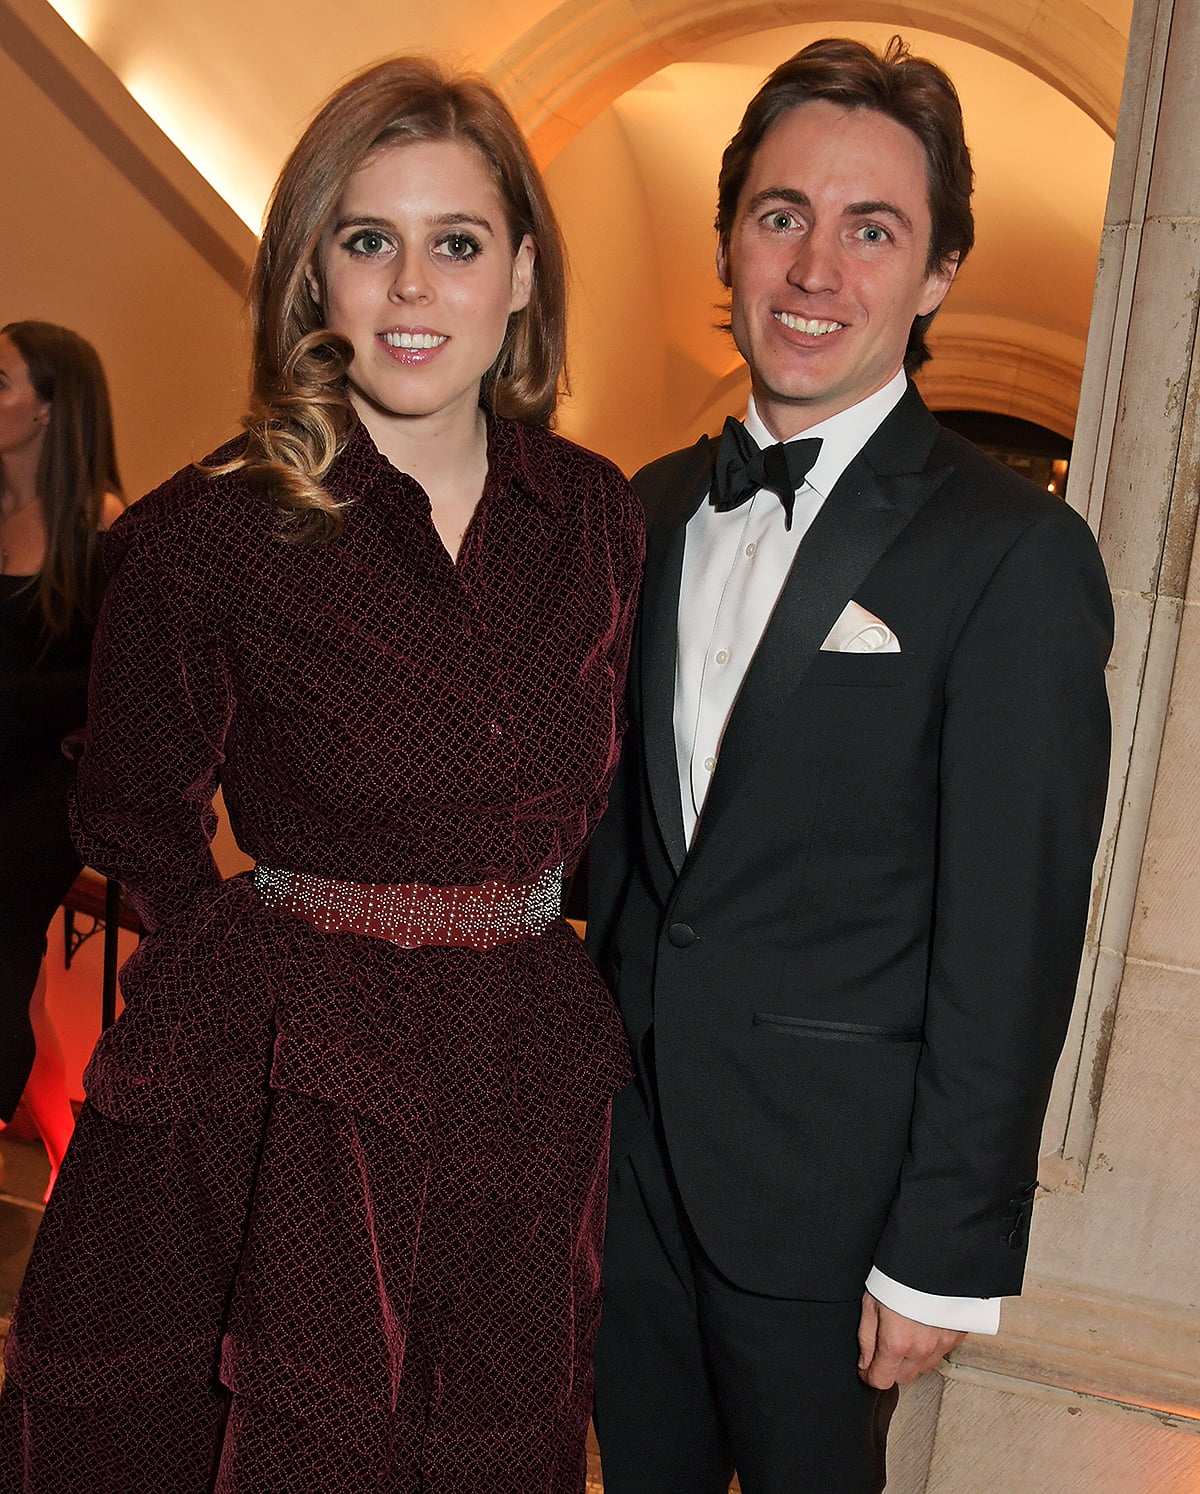 LONDON, ENGLAND - MARCH 12: Princess Beatrice of York and Edoardo Mapelli Mozzi attend The Portrait Gala 2019 hosted by Dr Nicholas Cullinan and Edward Enninful to raise funds for the National Portrait Gallery's 'Inspiring People' project at the National Portrait Gallery on March 12, 2019 in London, England. (Photo by David M. Benett/Dave Benett/Getty Images)